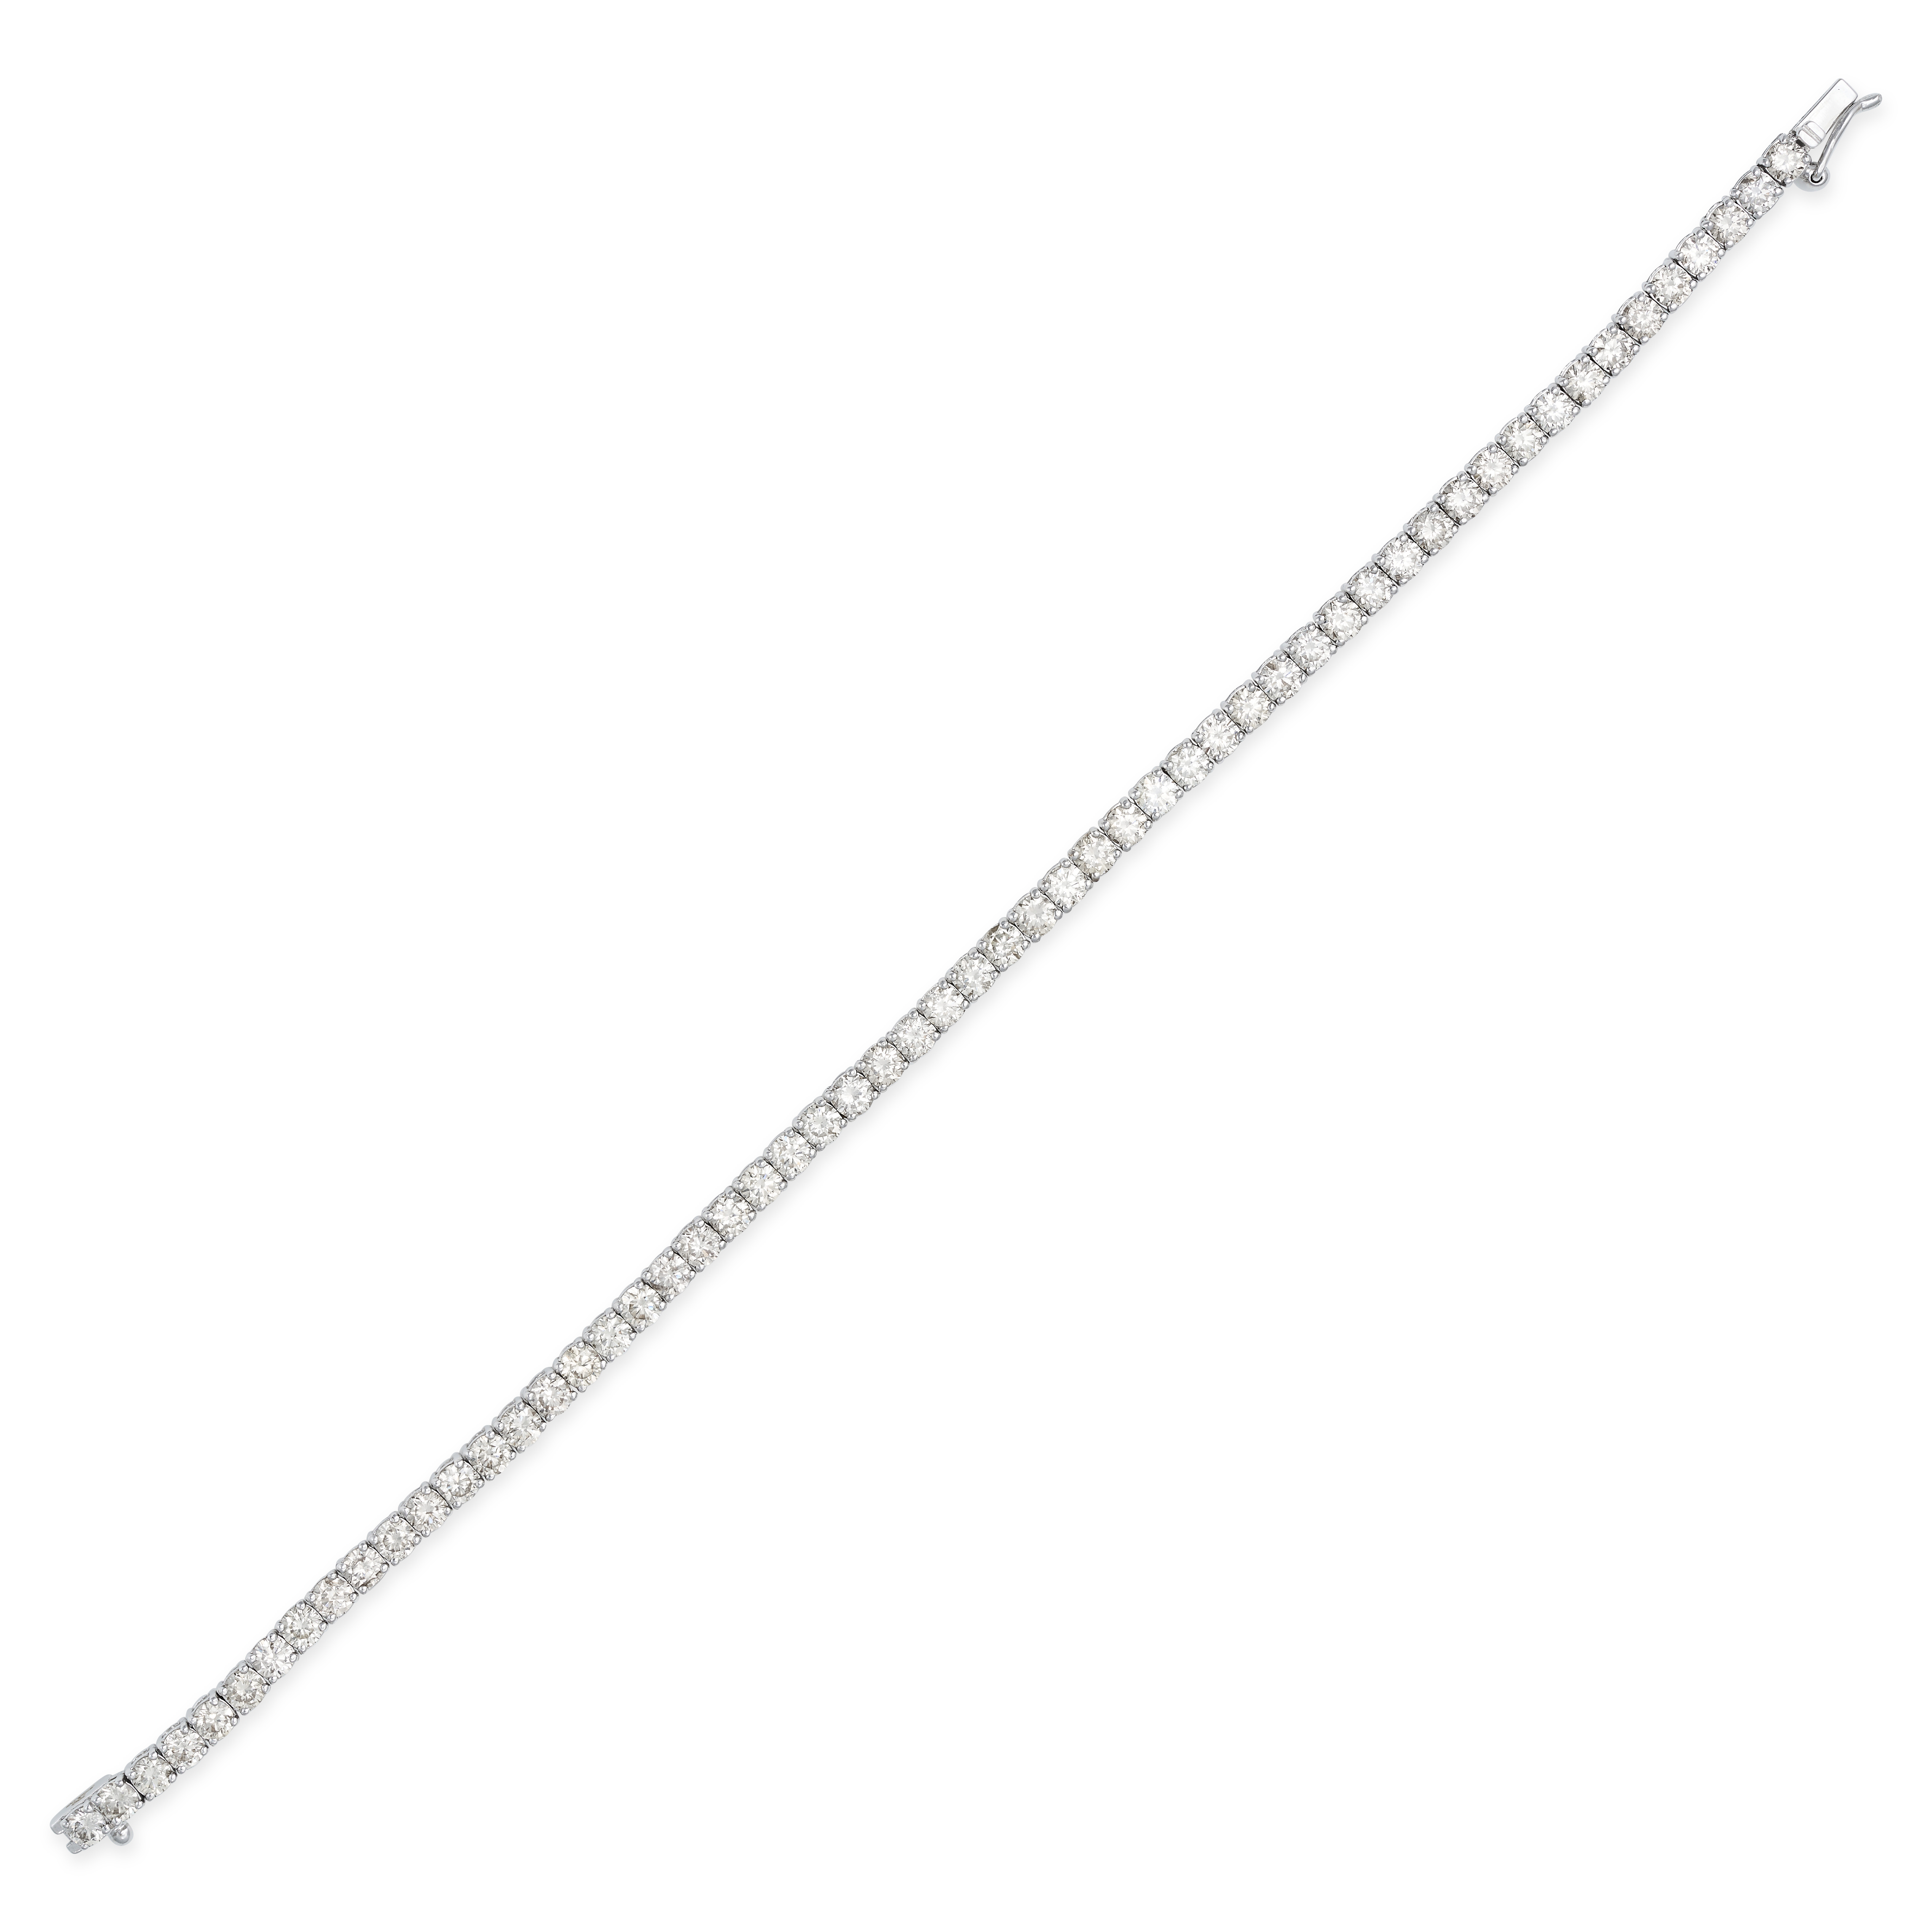 A DIAMOND LINE BRACELET in 18ct white gold, set with a row of round brilliant cut diamonds all to...